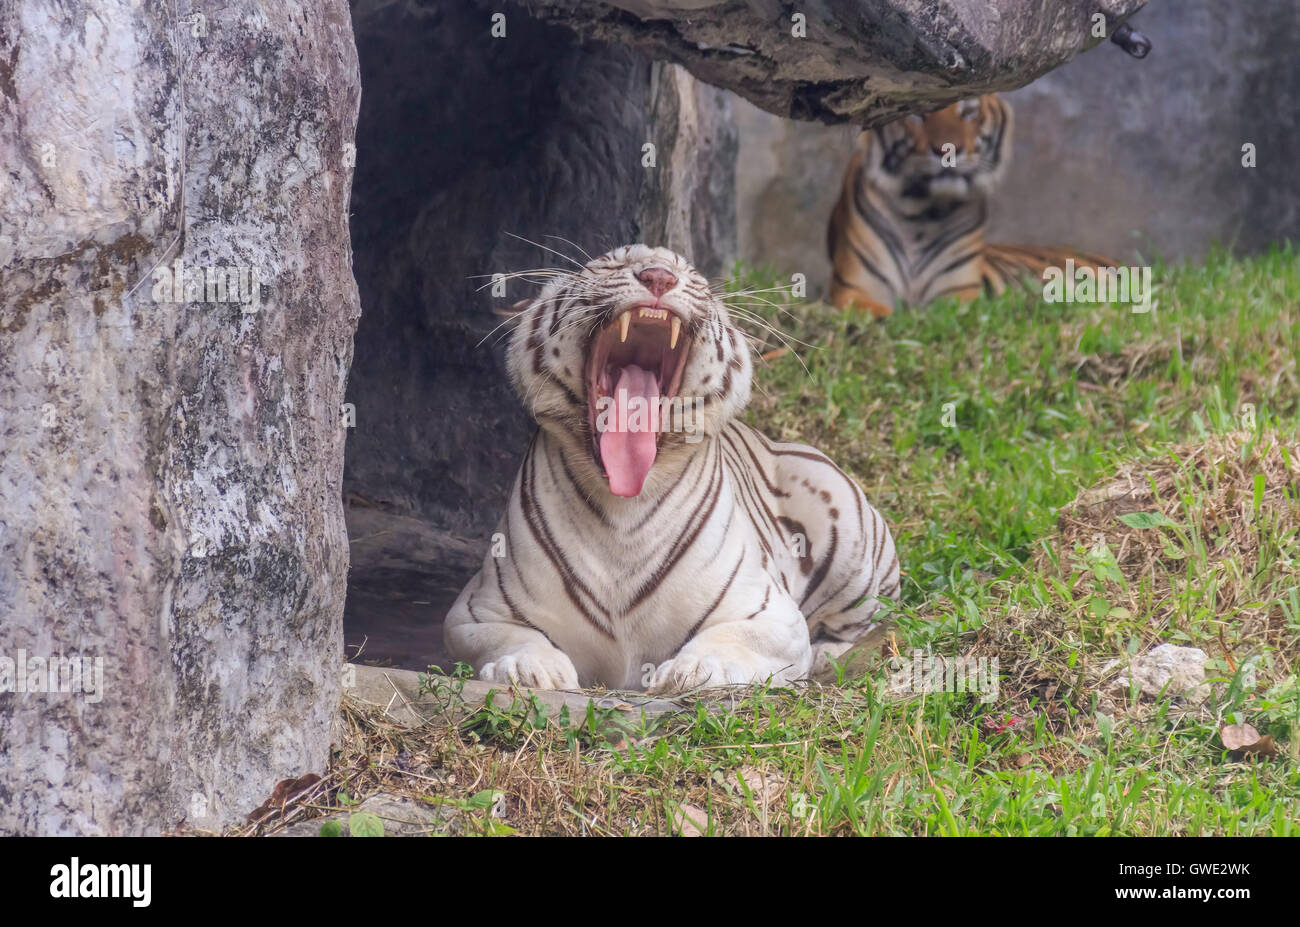 White tiger stripes on selected focus Stock Photo